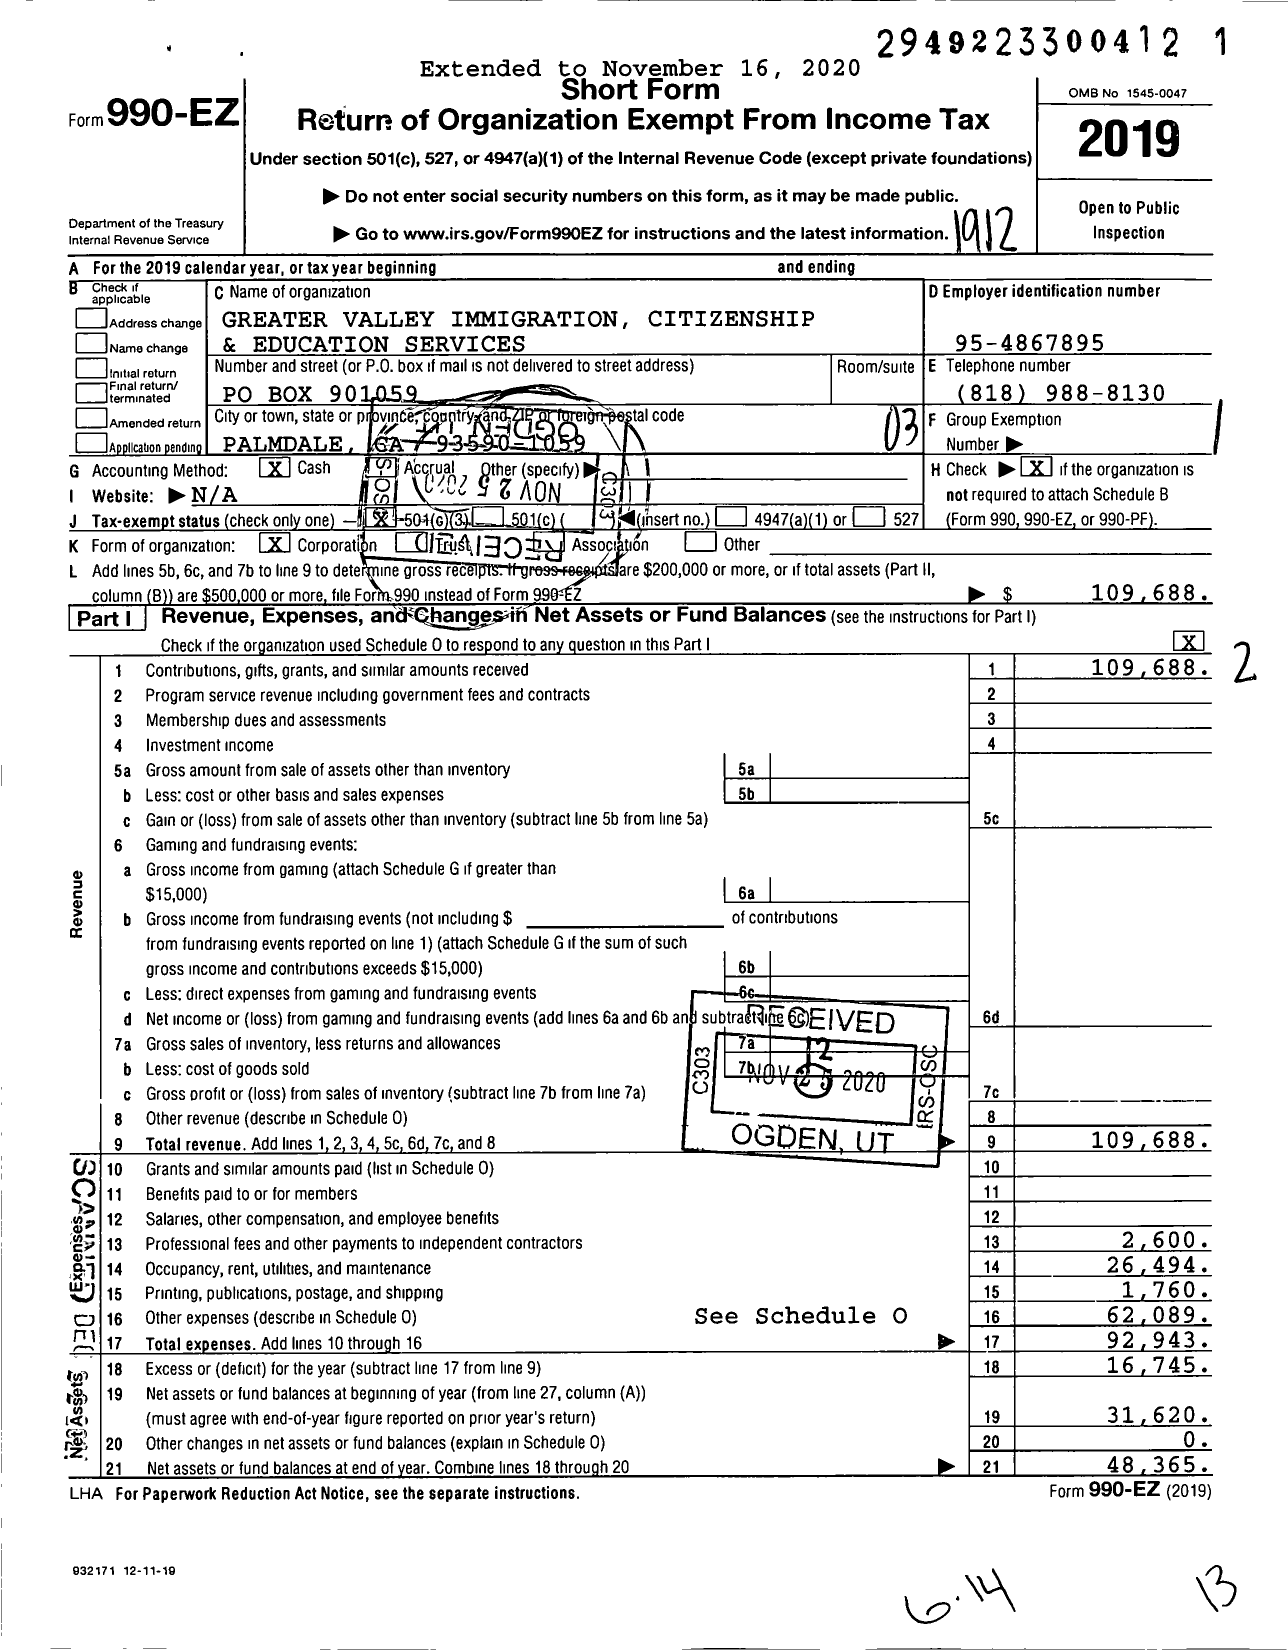 Image of first page of 2019 Form 990EZ for Greater Valley Immigration Citizenship and Education Services